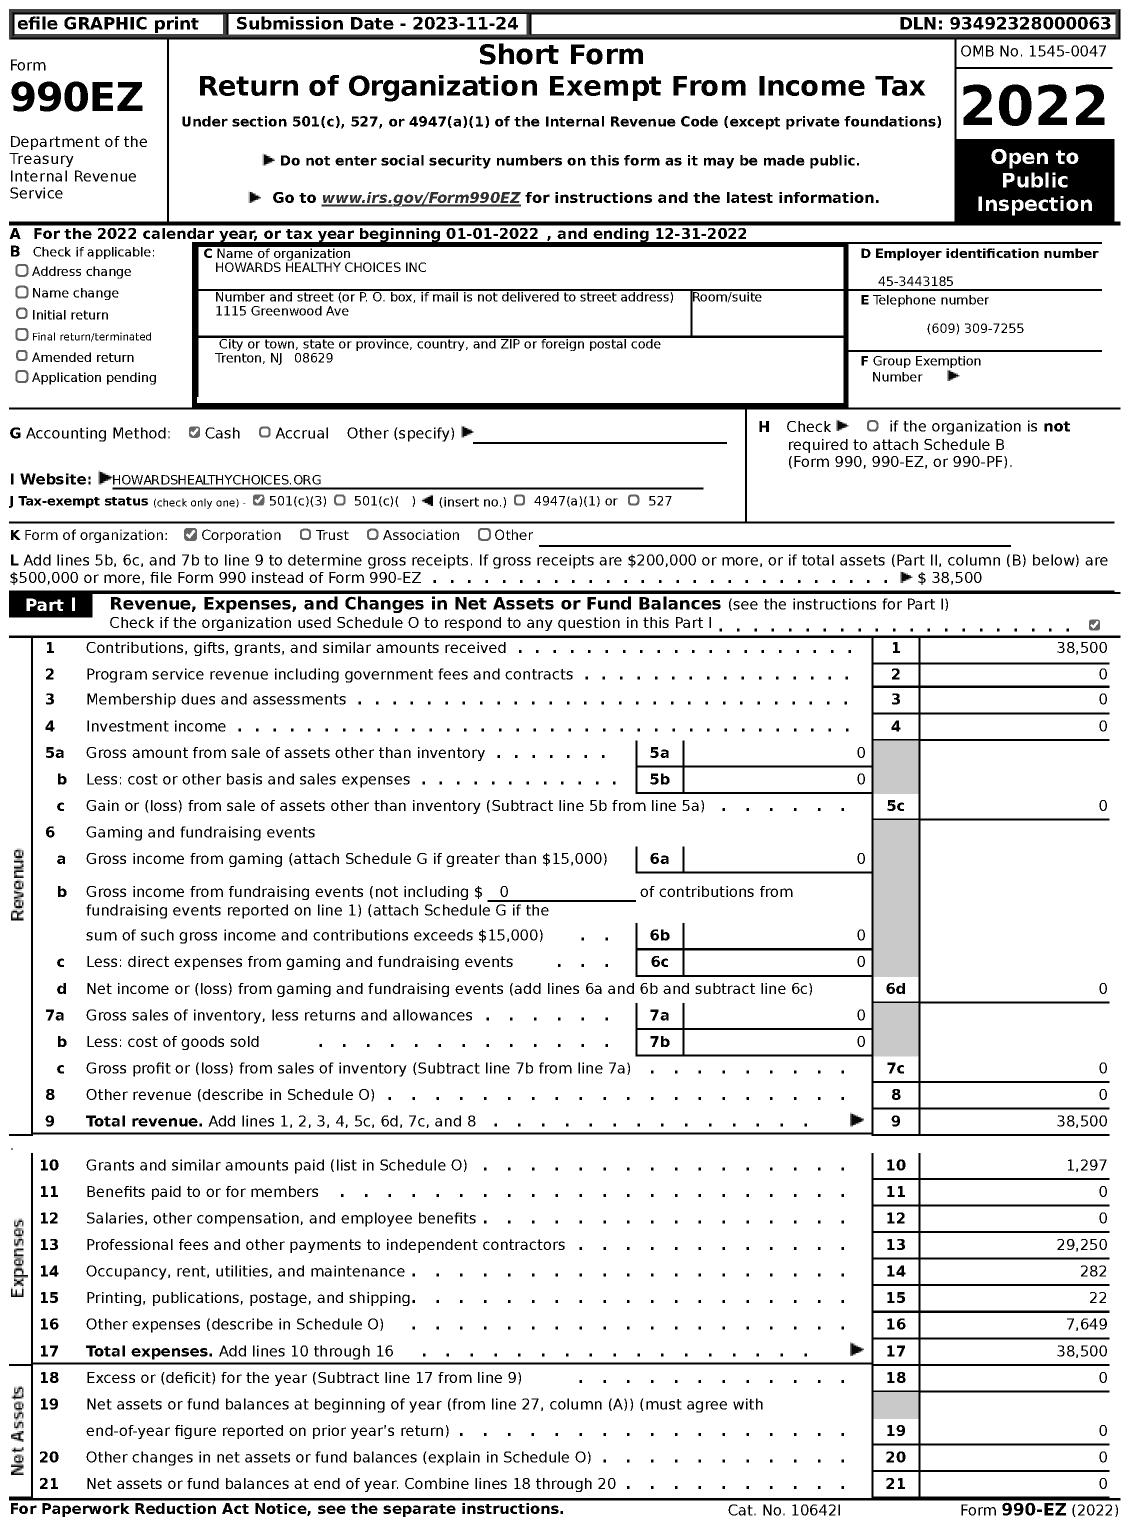 Image of first page of 2022 Form 990EZ for Howards Healthy Choices